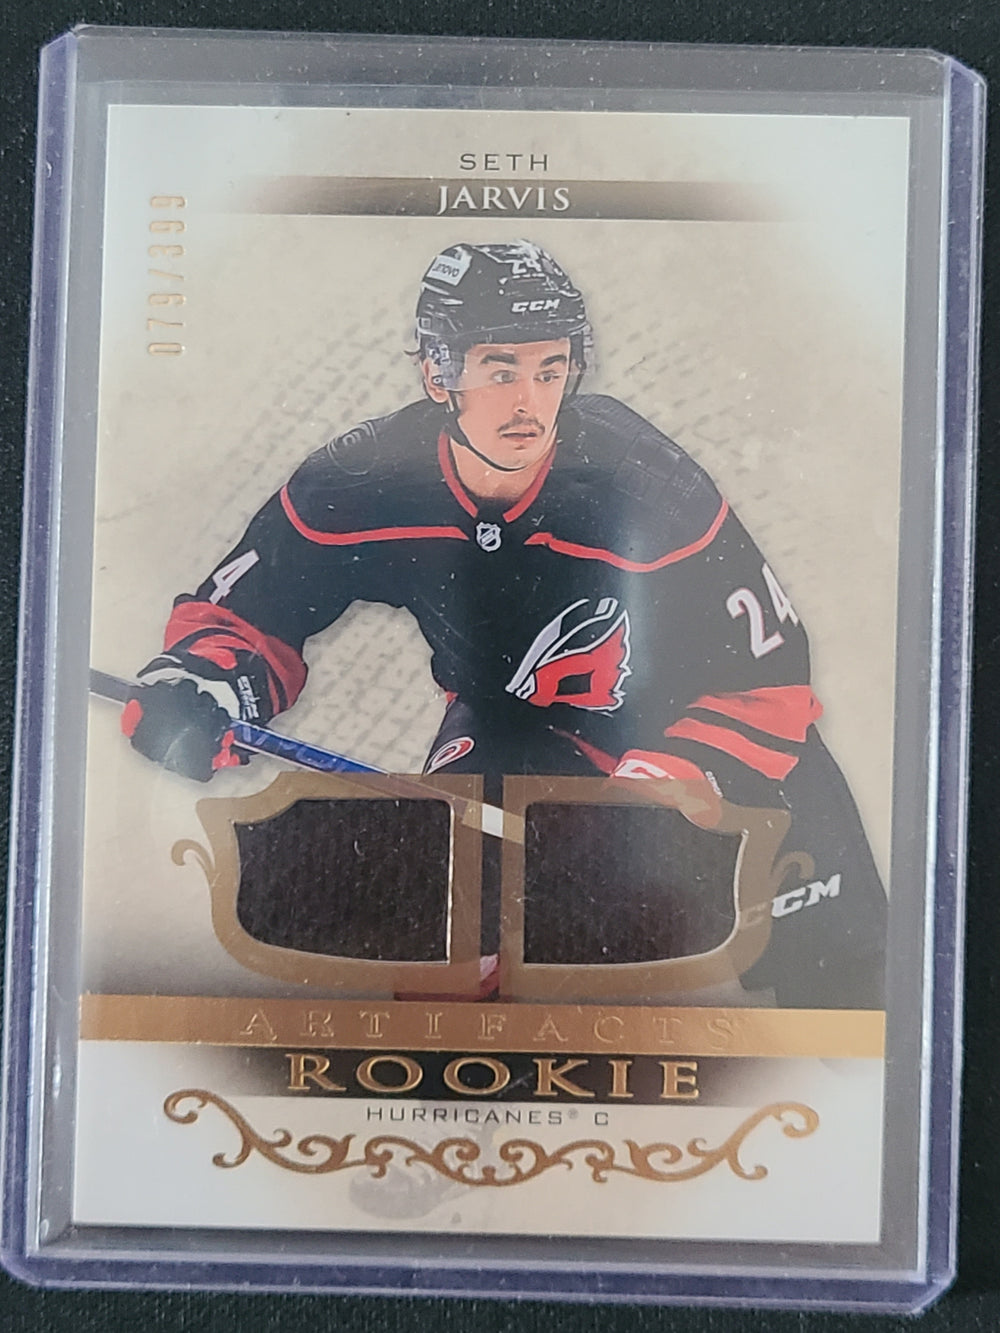 2021-22 Artifacts Rookie Dual Jersey Gold Relic #V Seth Jarvis Carolina Hurricanes 79/399